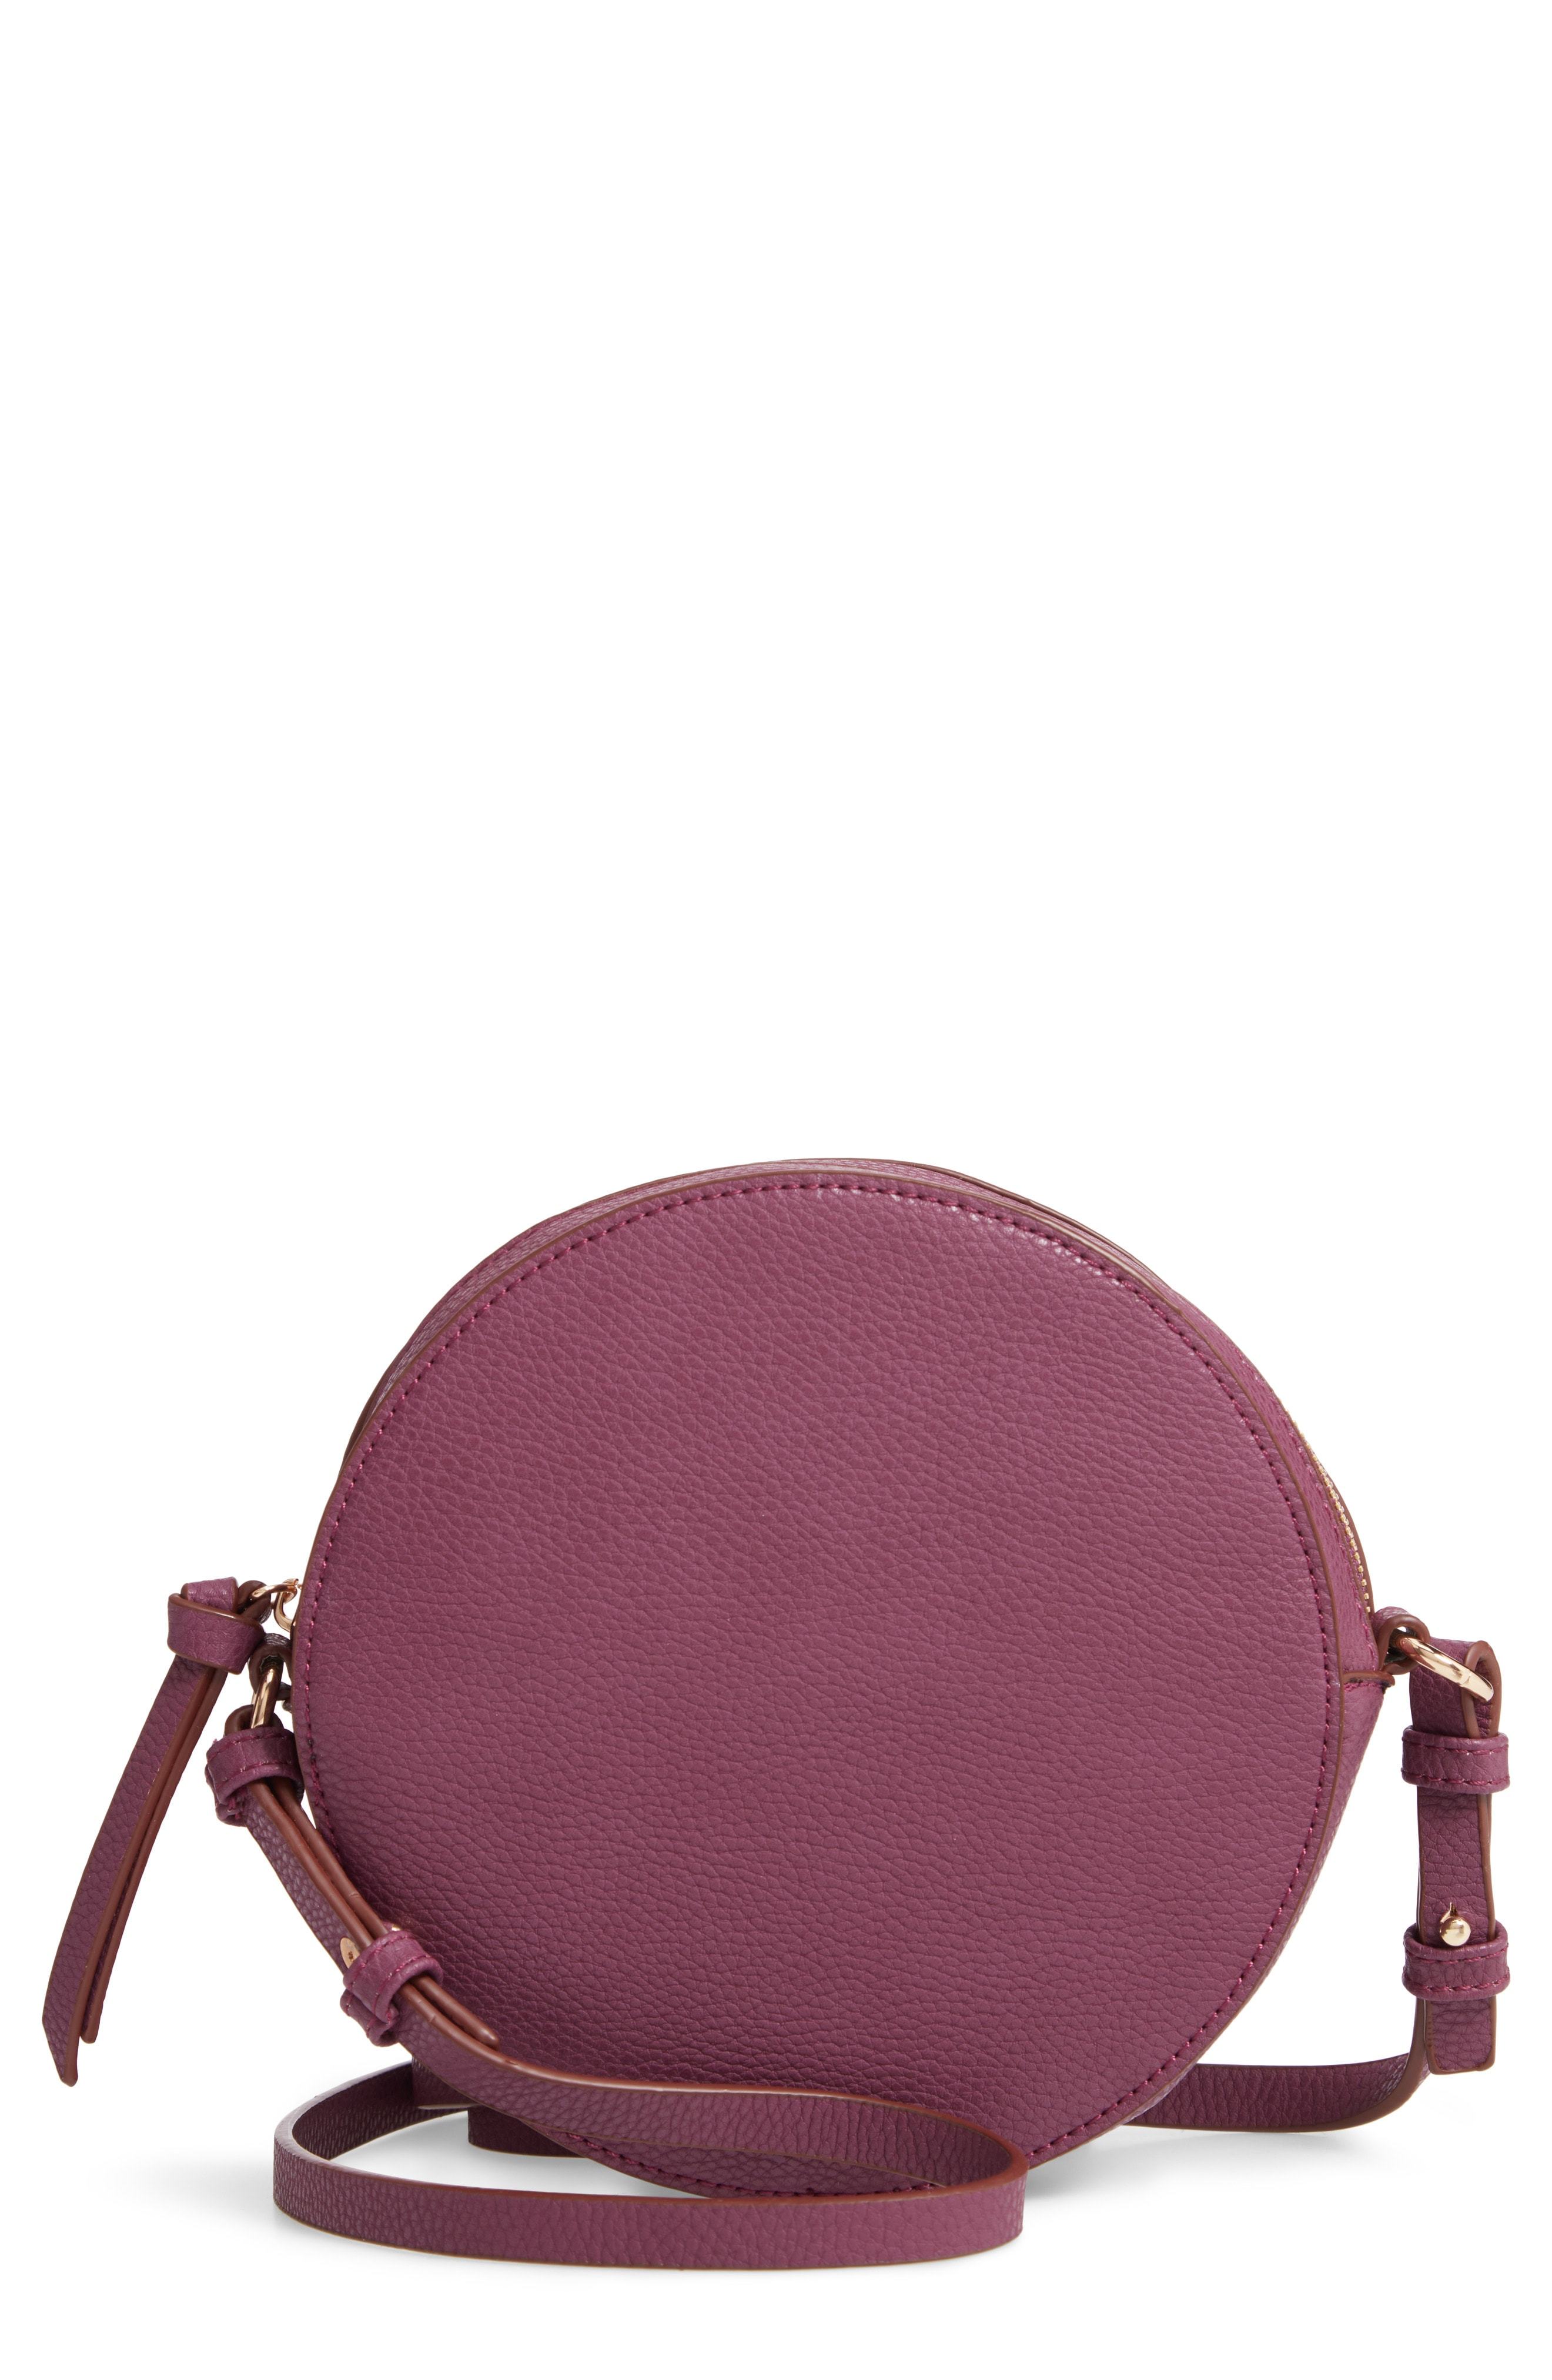 Chelsea28 Cassie Faux Leather Circle Crossbody Bag, $49 | Nordstrom ...